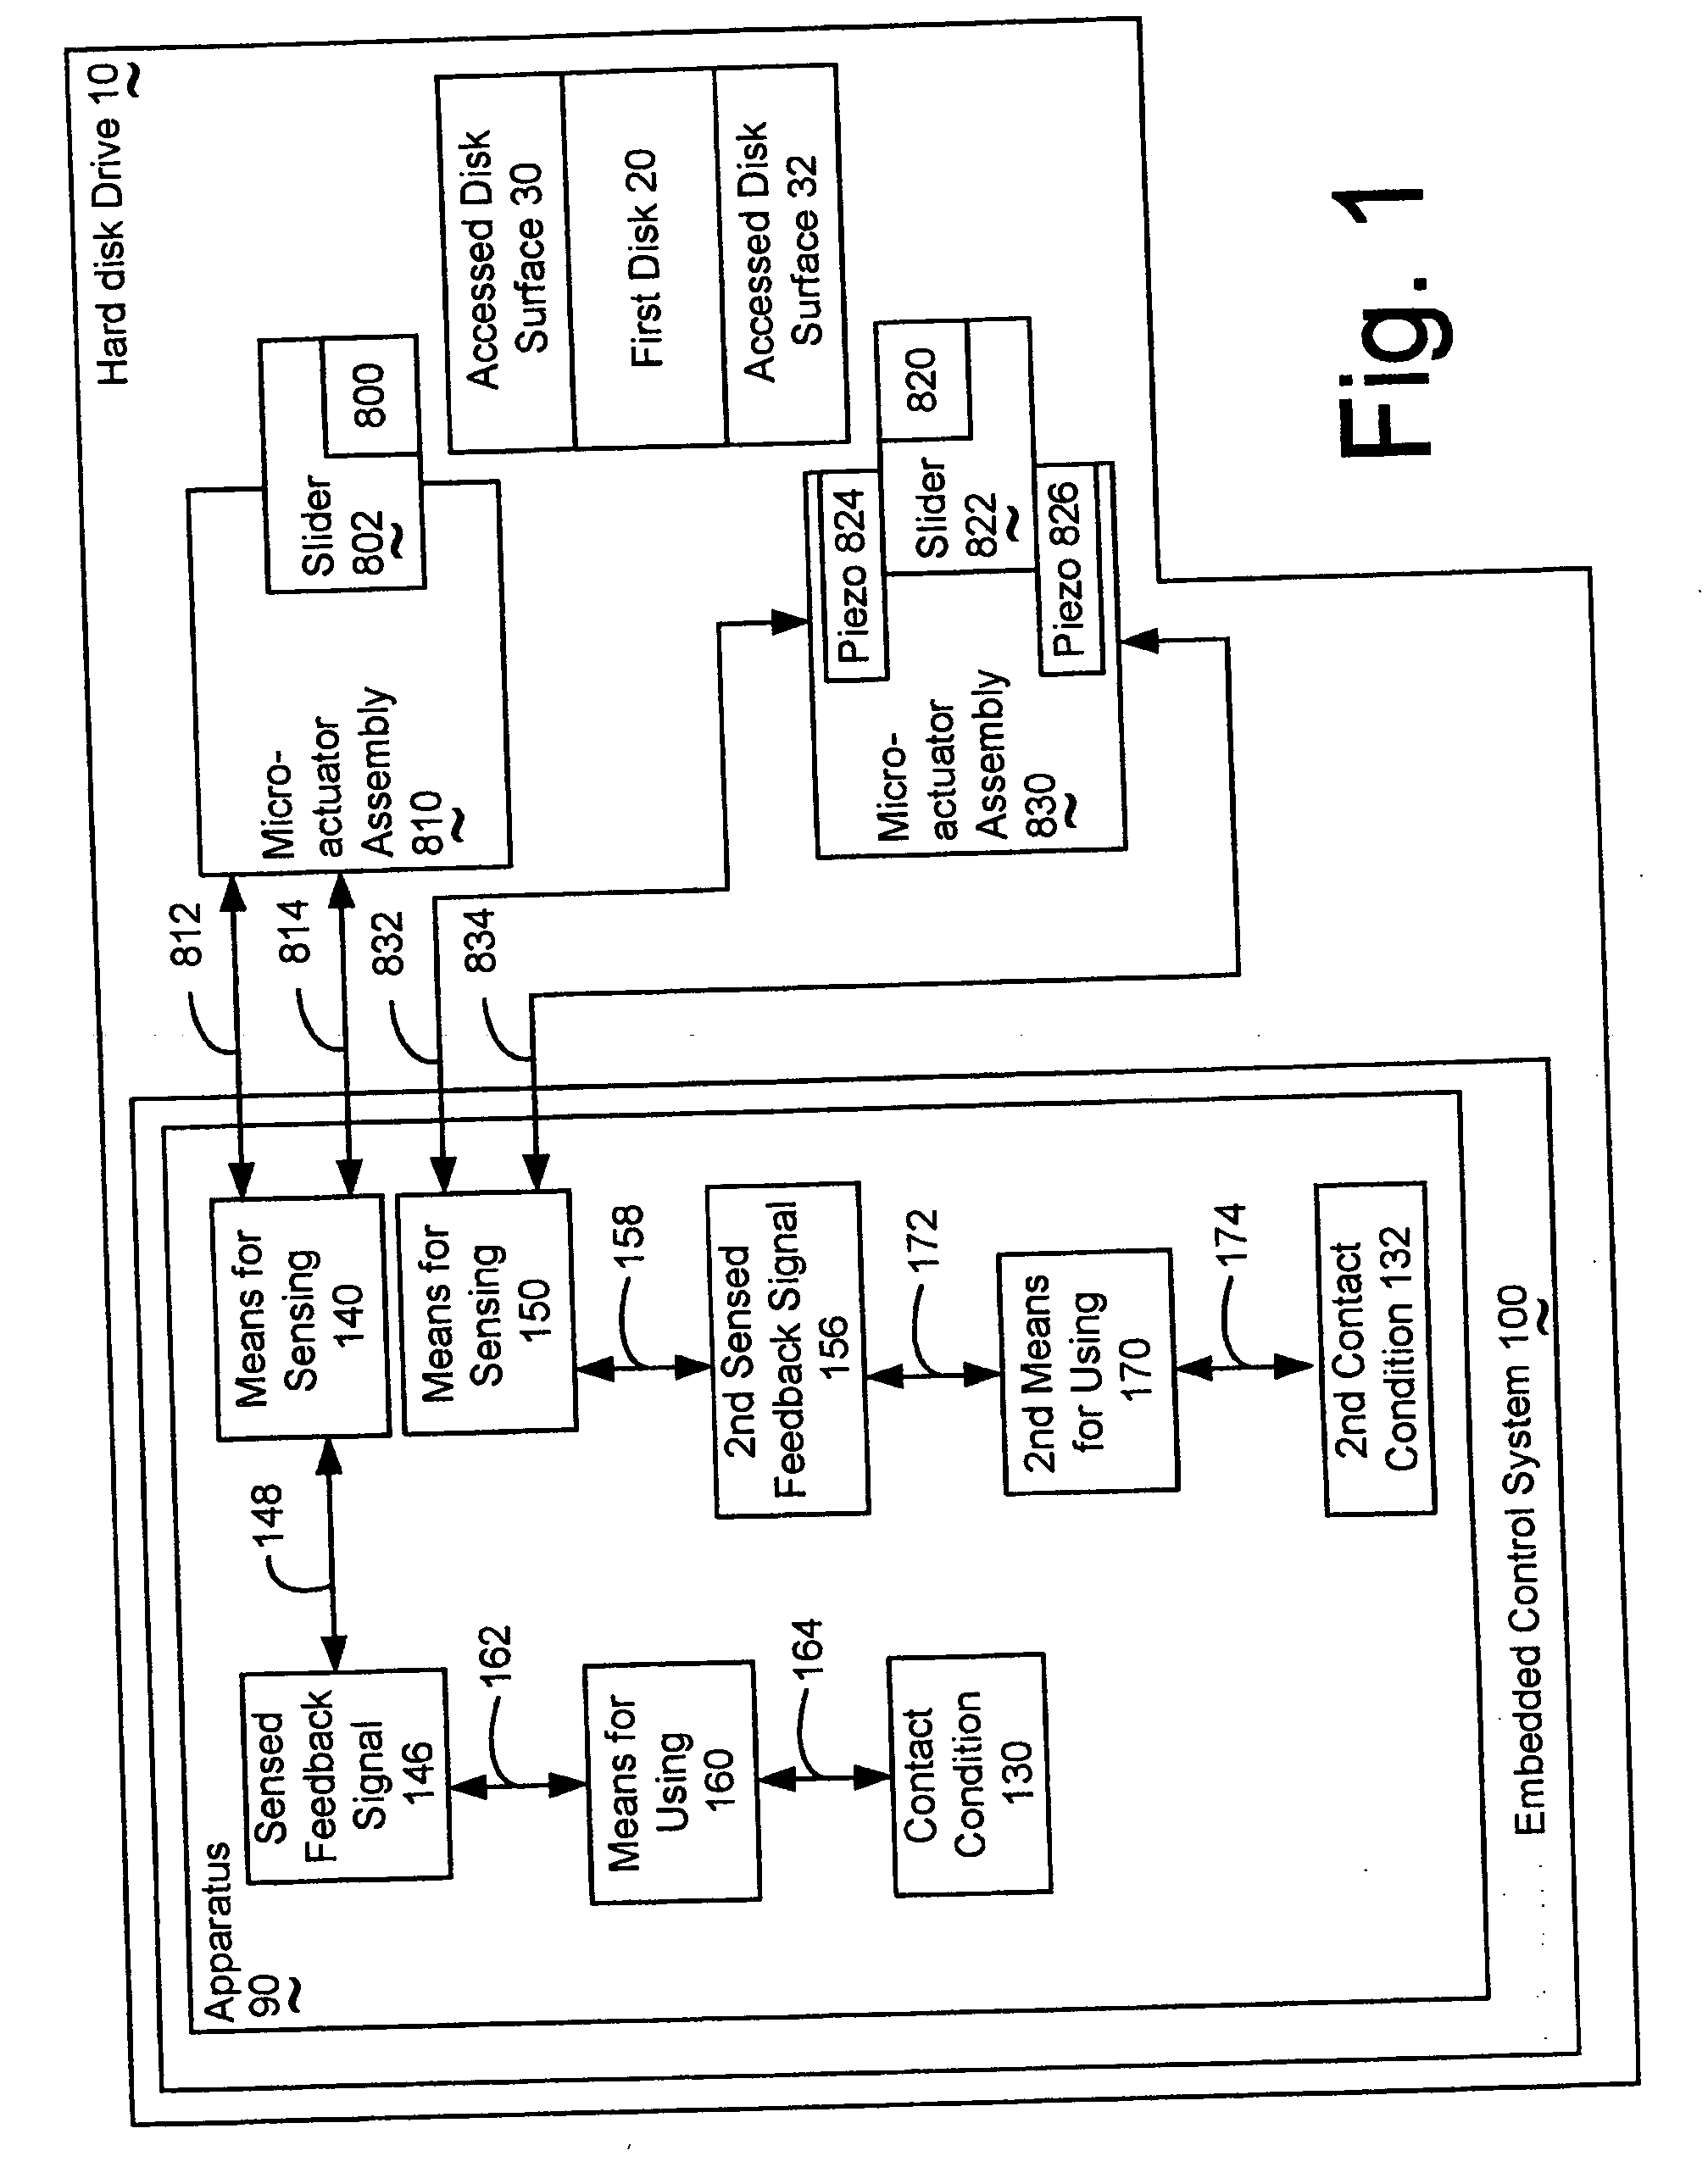 Methods for detecting contact between a read-write head and the accessed disk surface in a hard disk drive